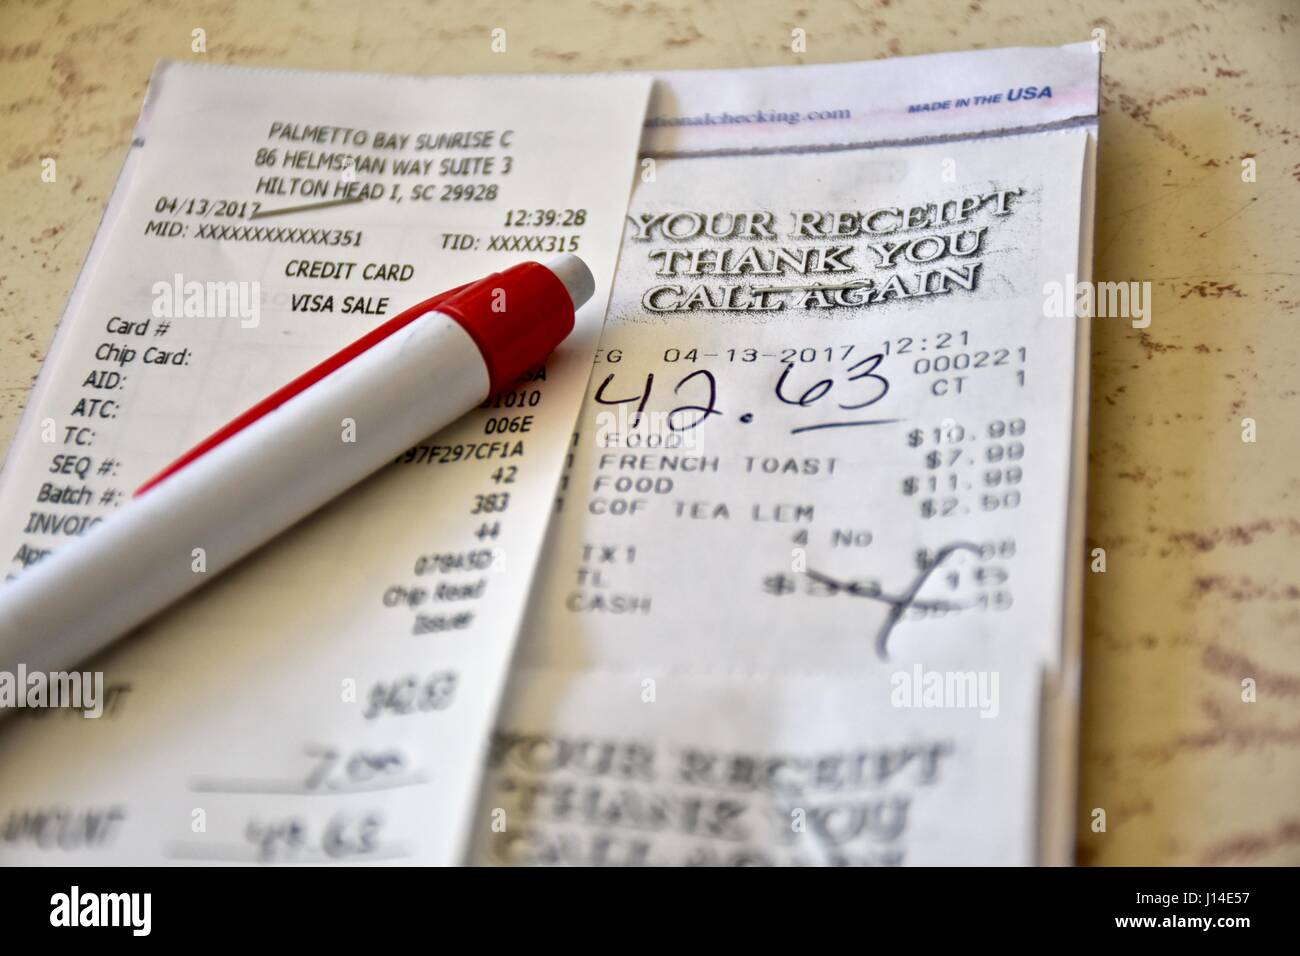 Restaurant tab receipt paid with tip included Stock Photo